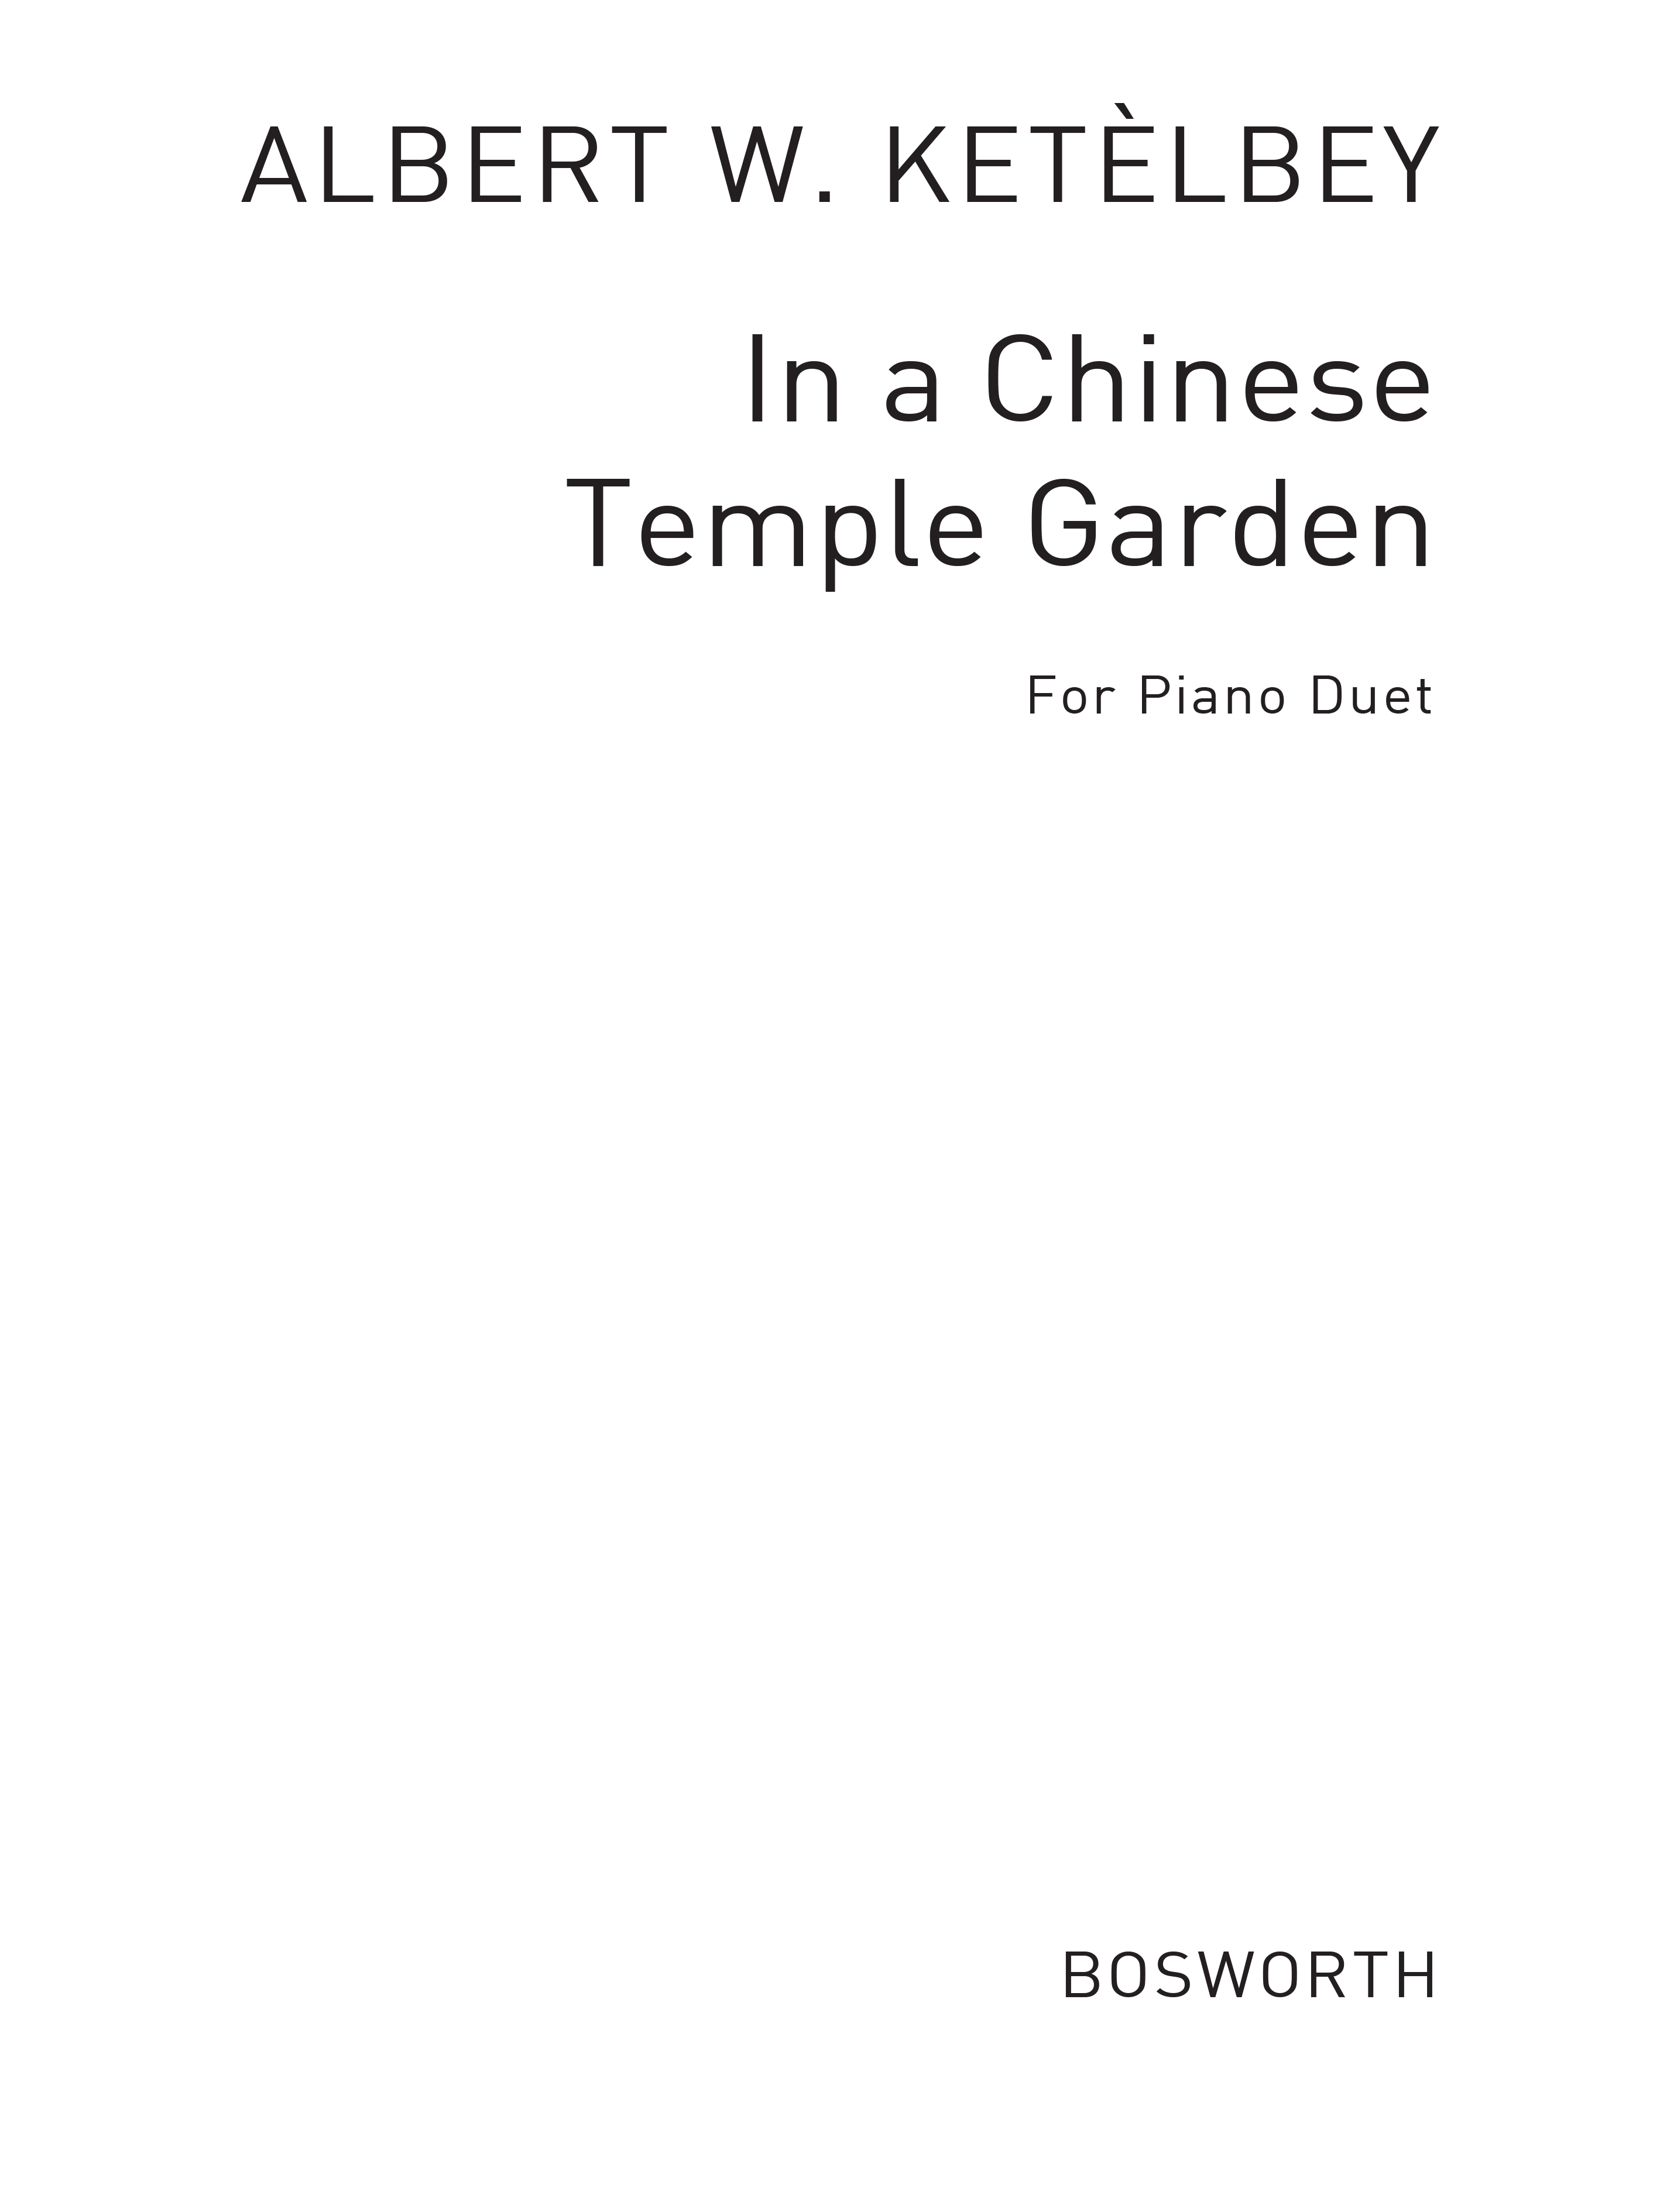 Albert Ketelbey: In A Chinese Temple Garden (Piano Duet)